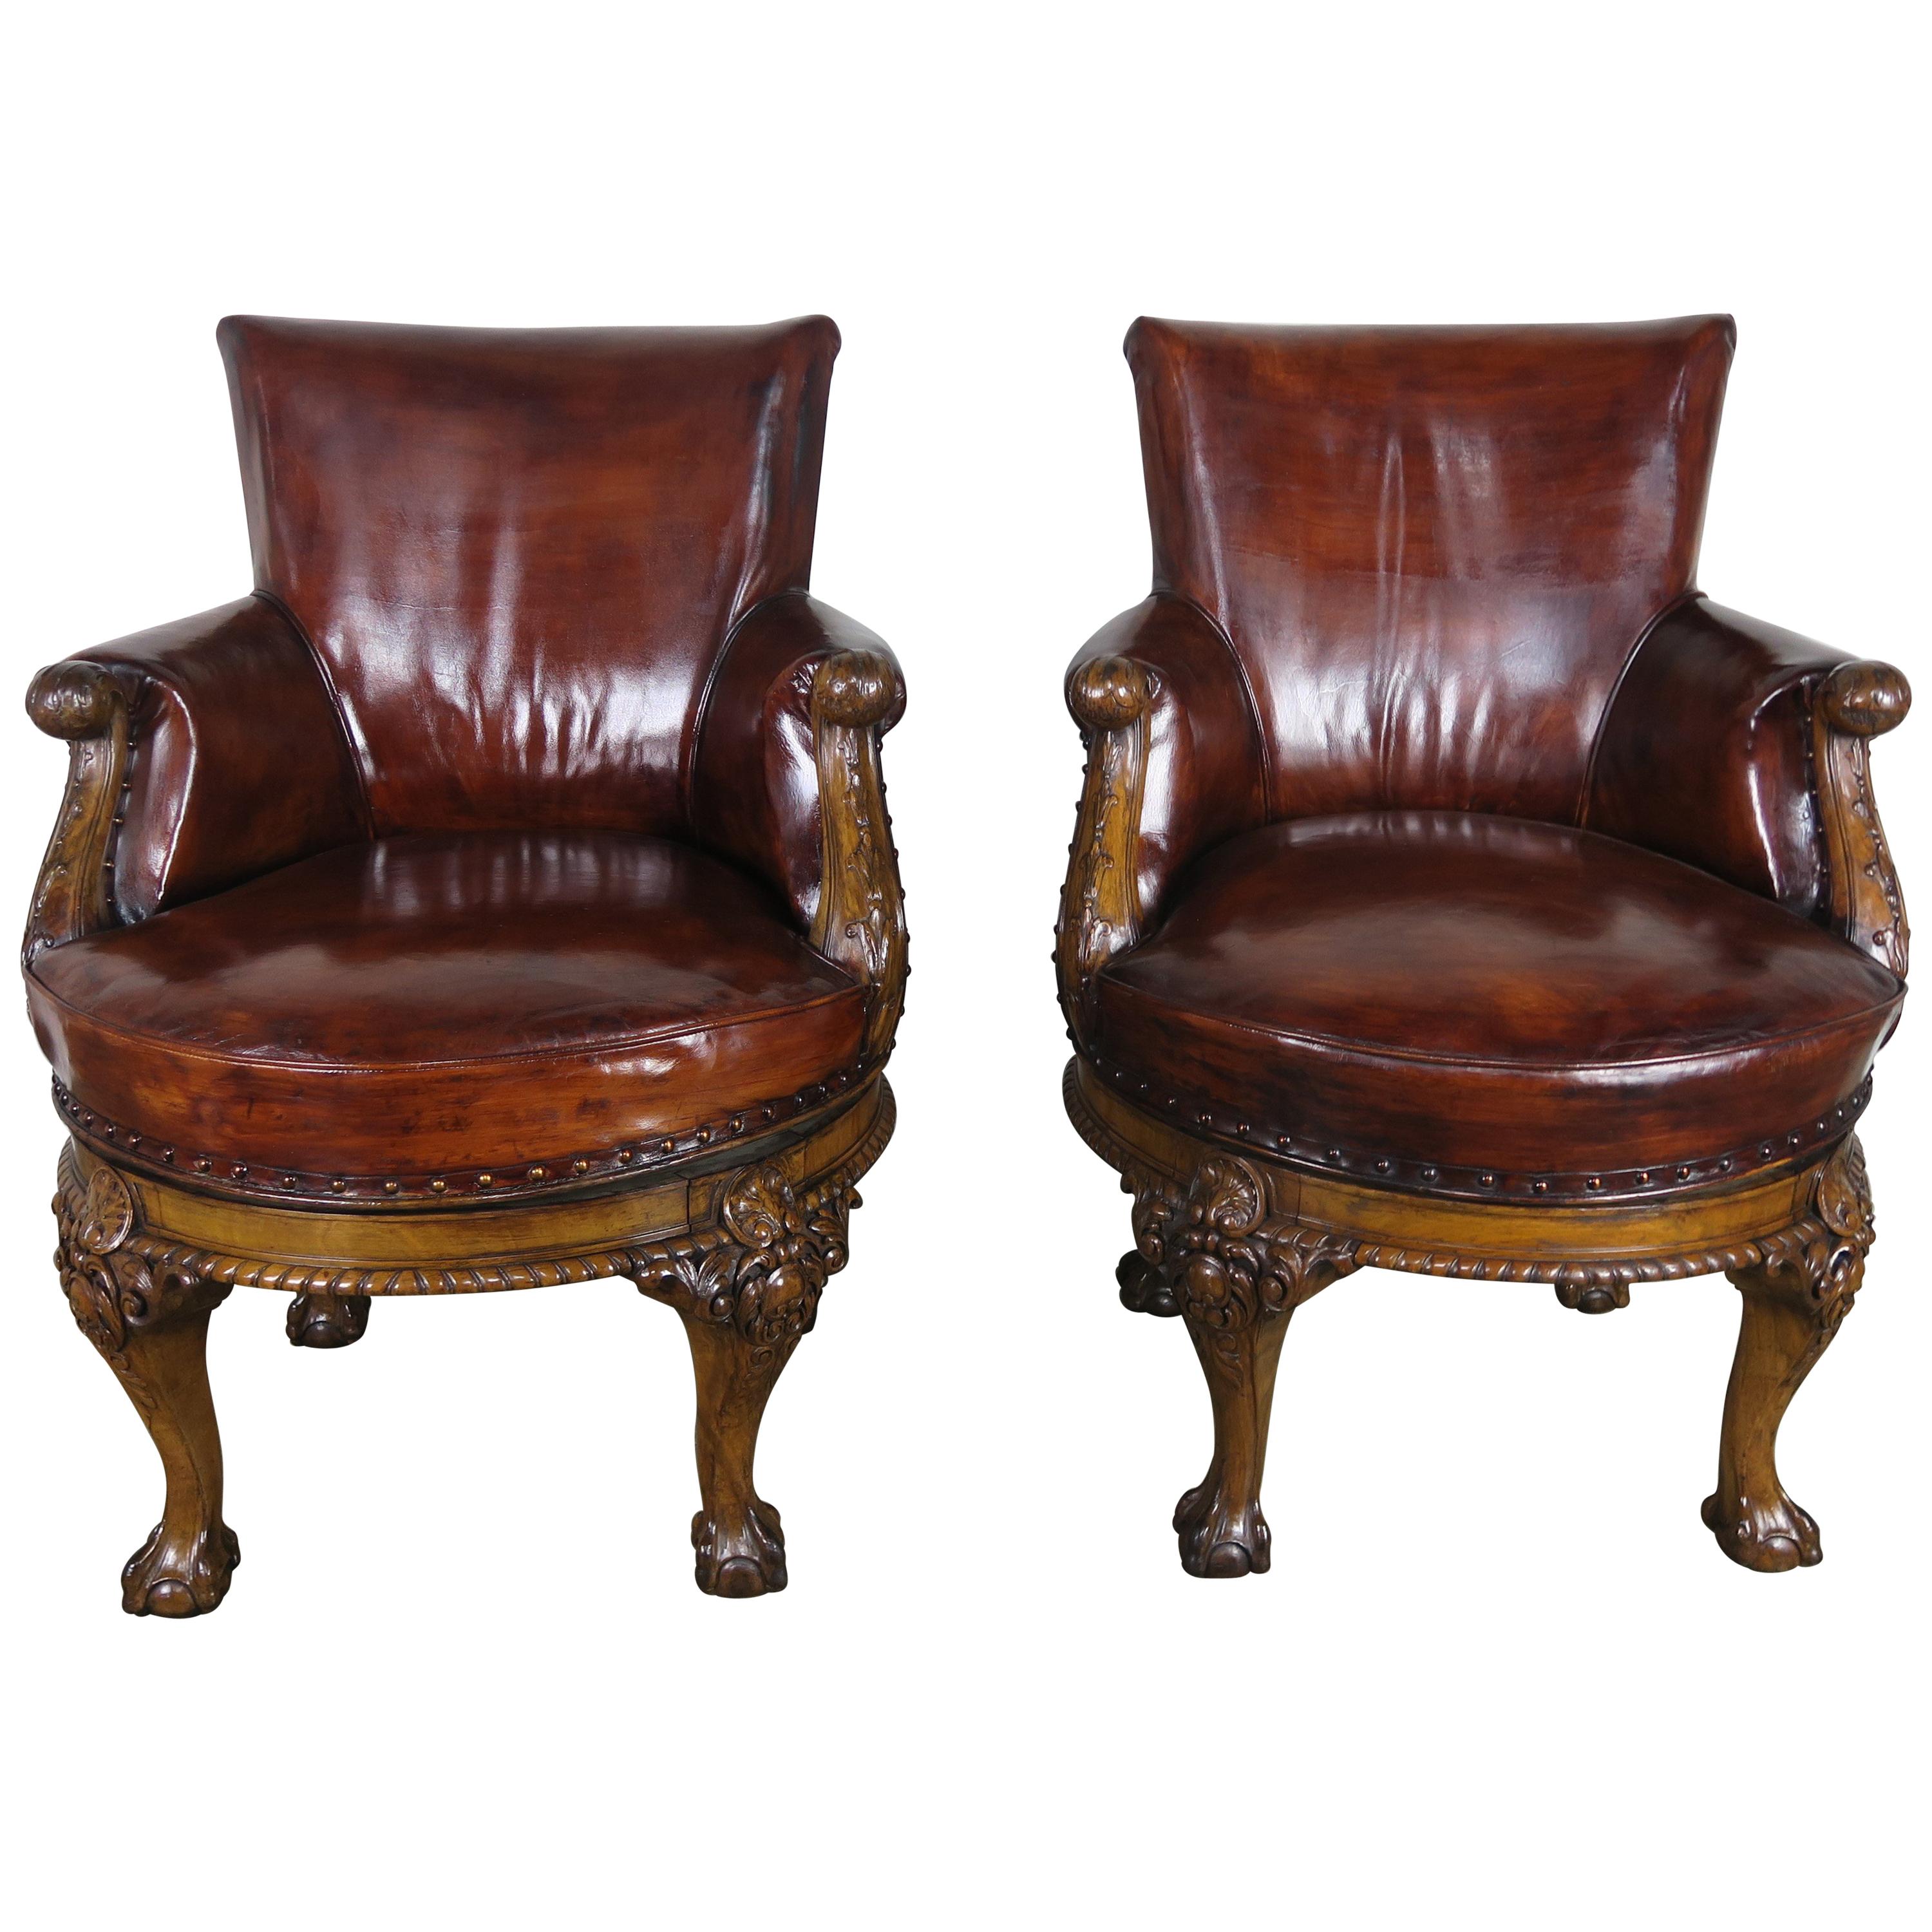 Pair of George II Style English Swivel Library Chairs